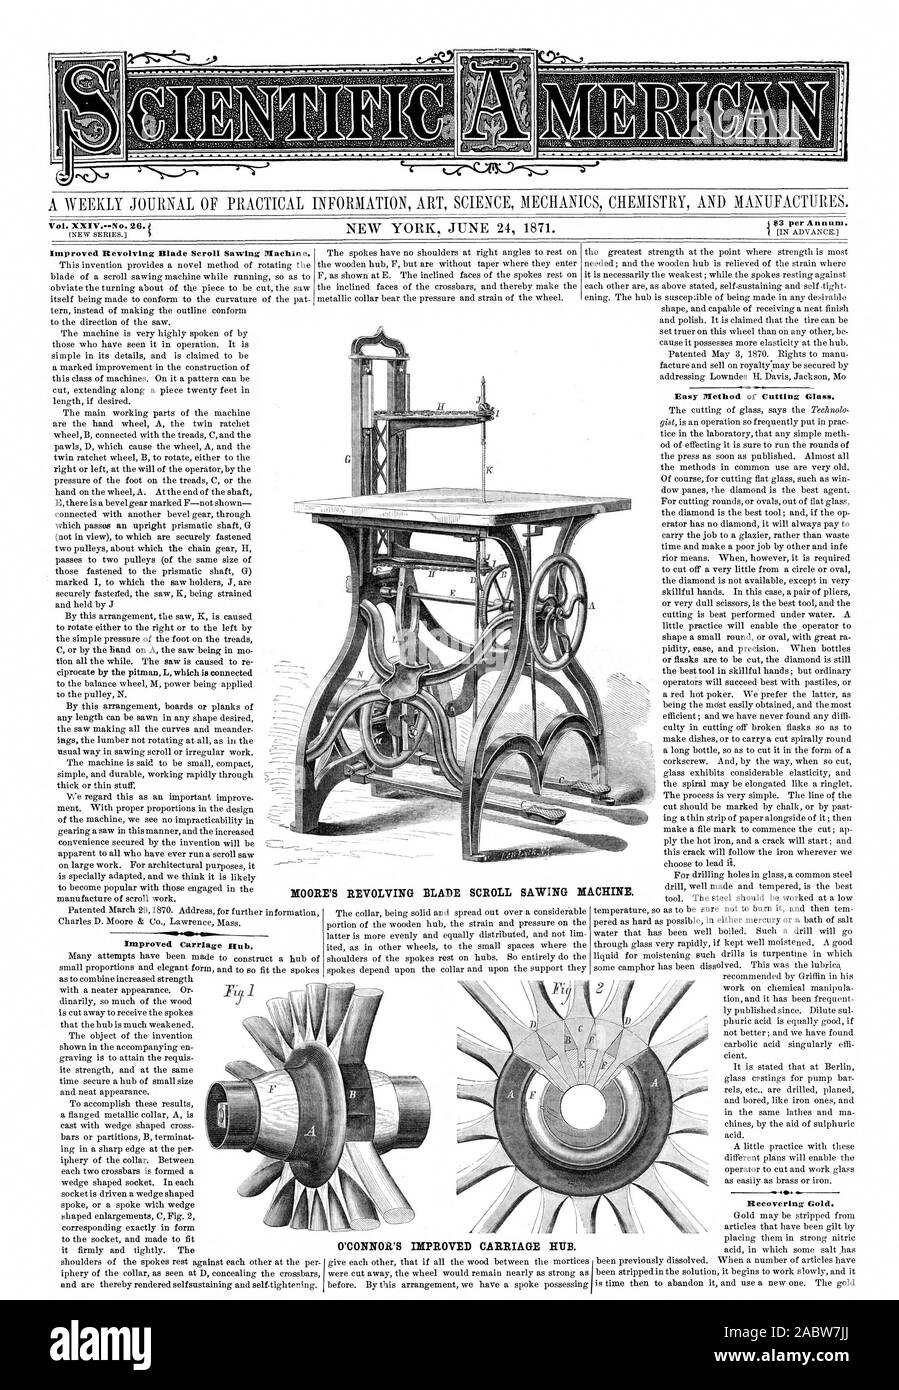 A WEEKLY JOURNAL OF PRACTICAL INFORMATION ART SCIENCE MECHANICS CHEMISTRY AND MANUFACTURES. $3 per Annum. Improved Revolving Blade Scroll Sawing Machine. Improved Carriage nab. MOORE'S REVOLVING BLADE SCROLL SAWING X O'CONNOR'S IMPROVED CARRIAGE HUB. Easy Method of Cutting Glass. Recovering Gold. ACHINE., scientific american, 1871-06-24 Stock Photo